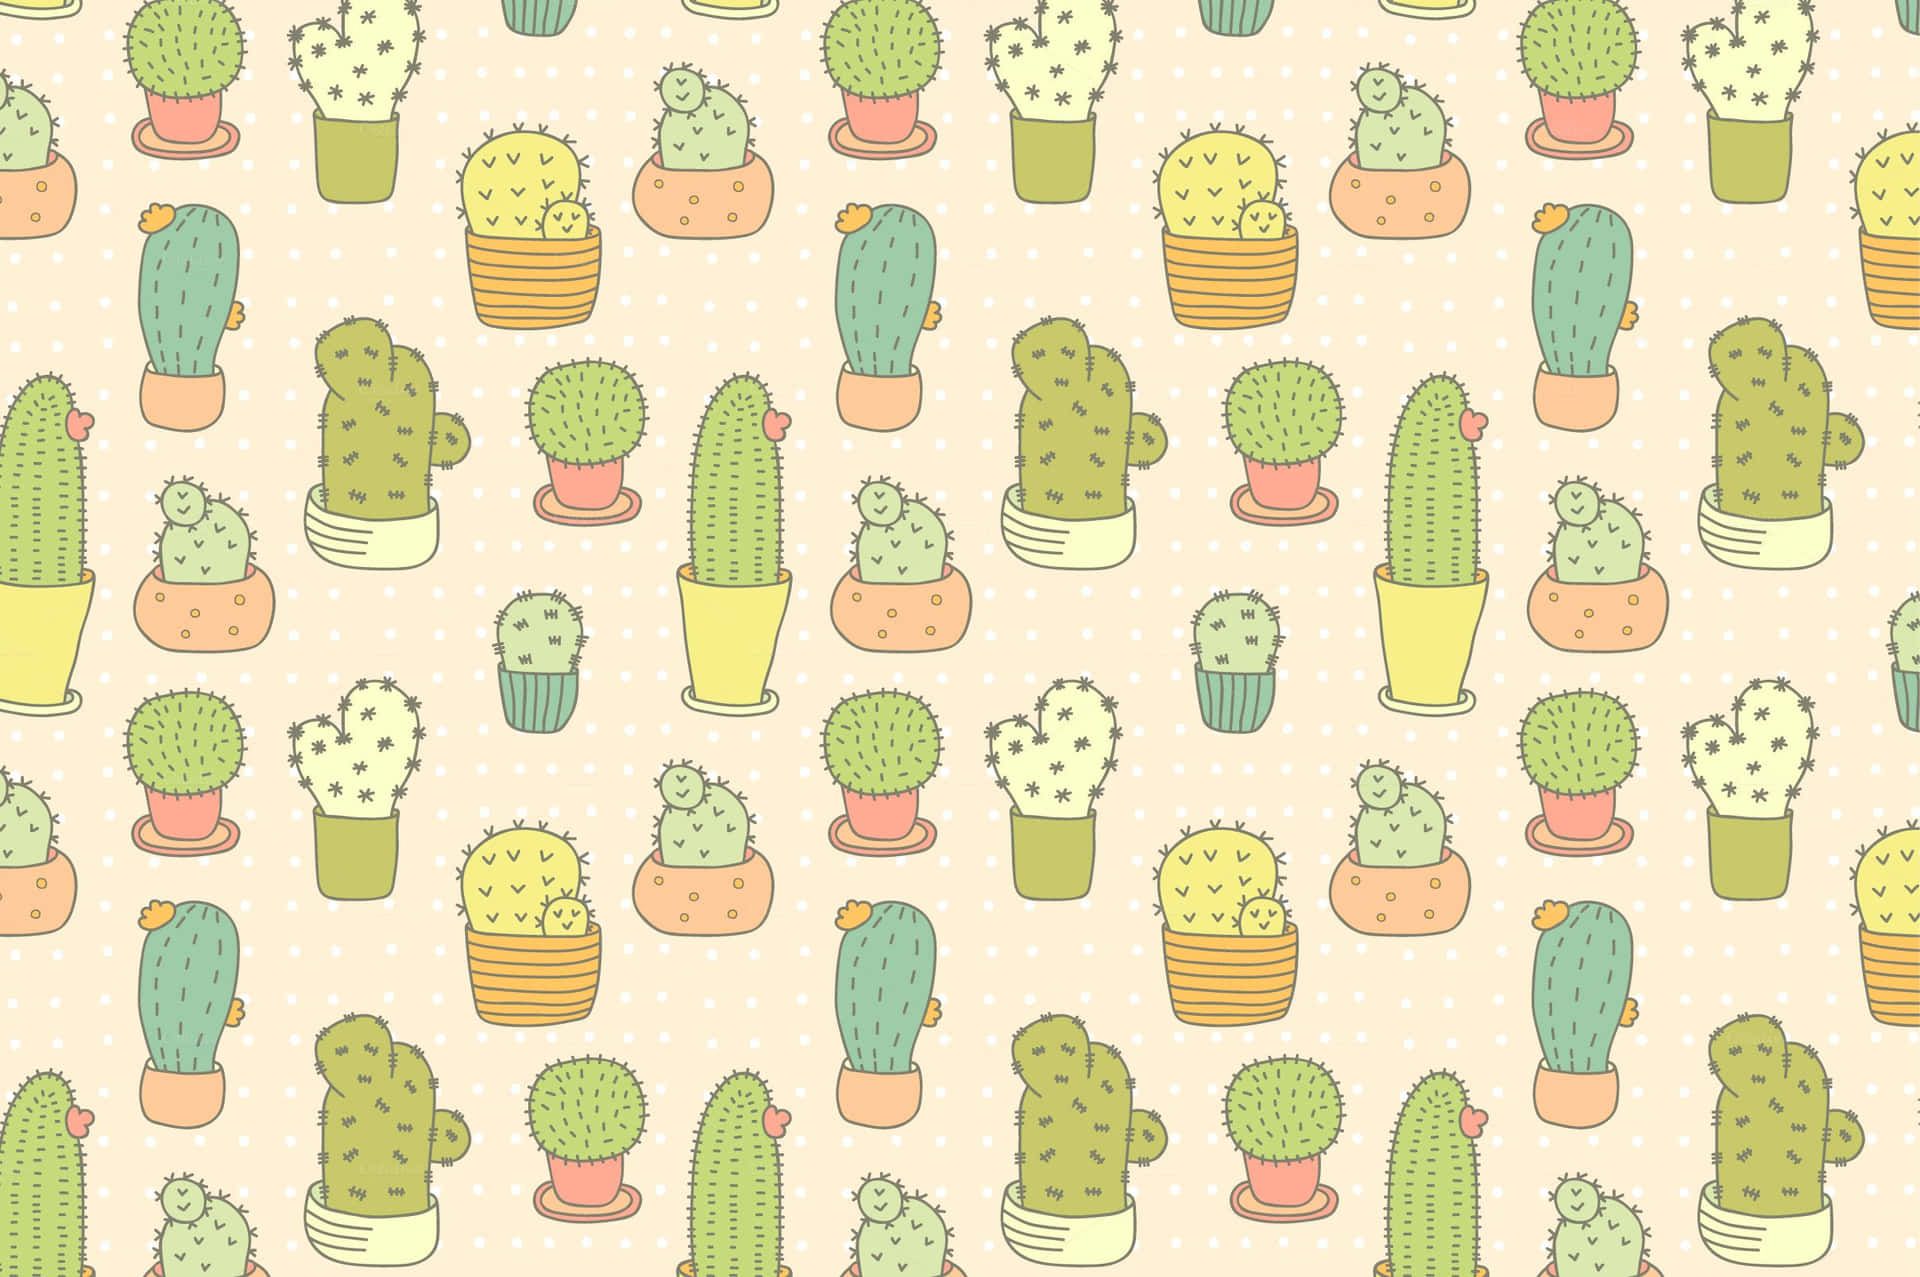 Cactus pattern with different types of plants - Cactus